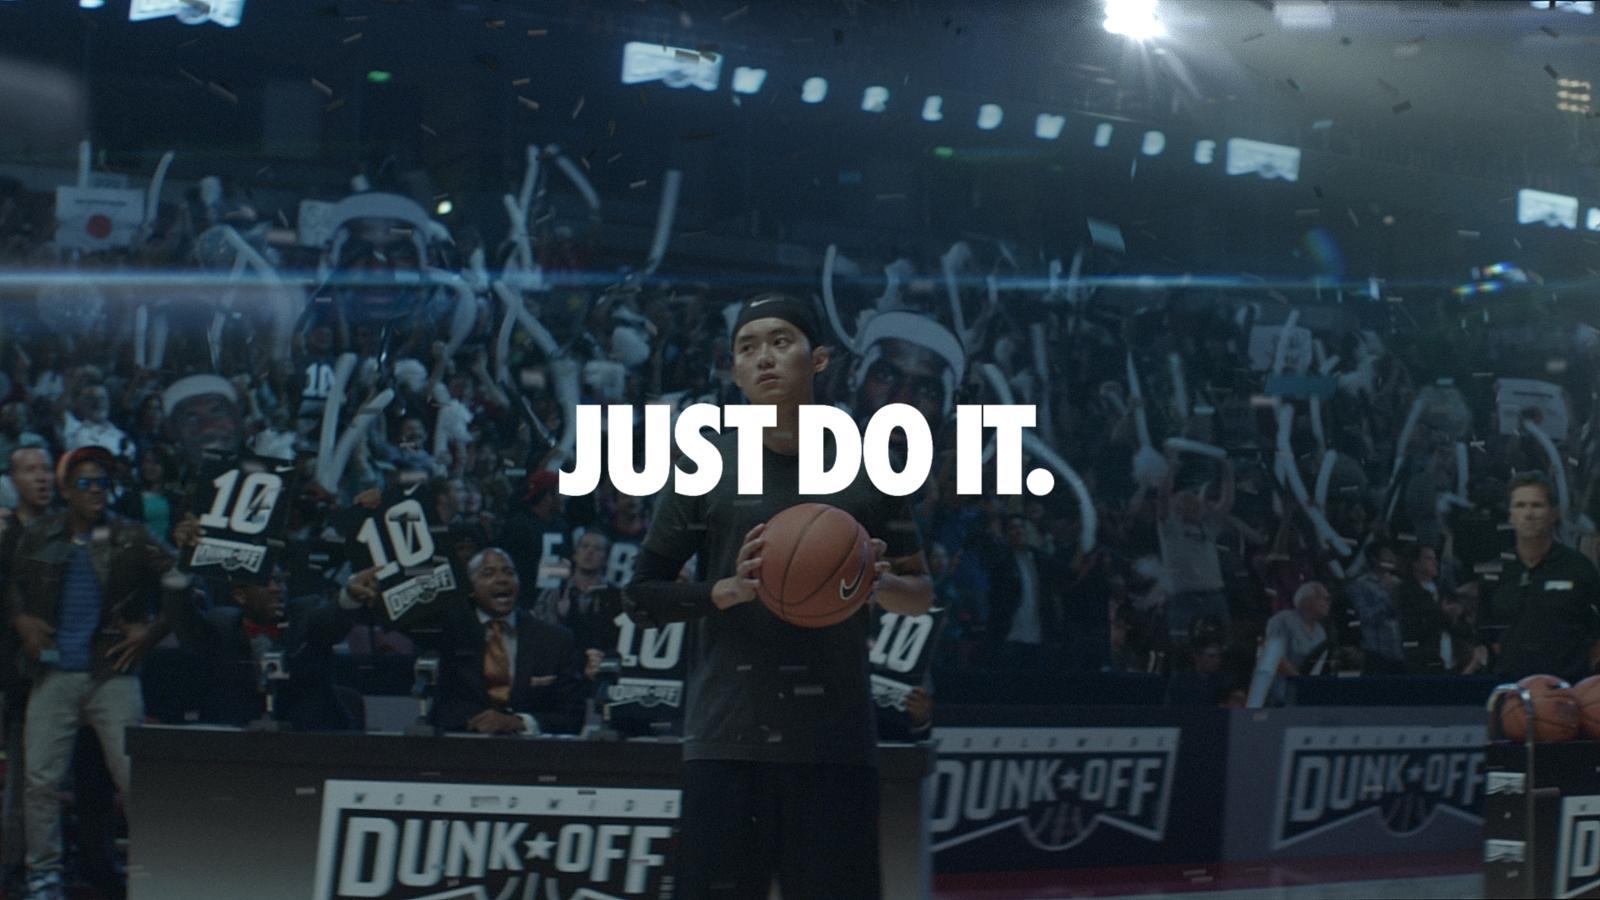 Nike Redefines Just Do It with New Campaign